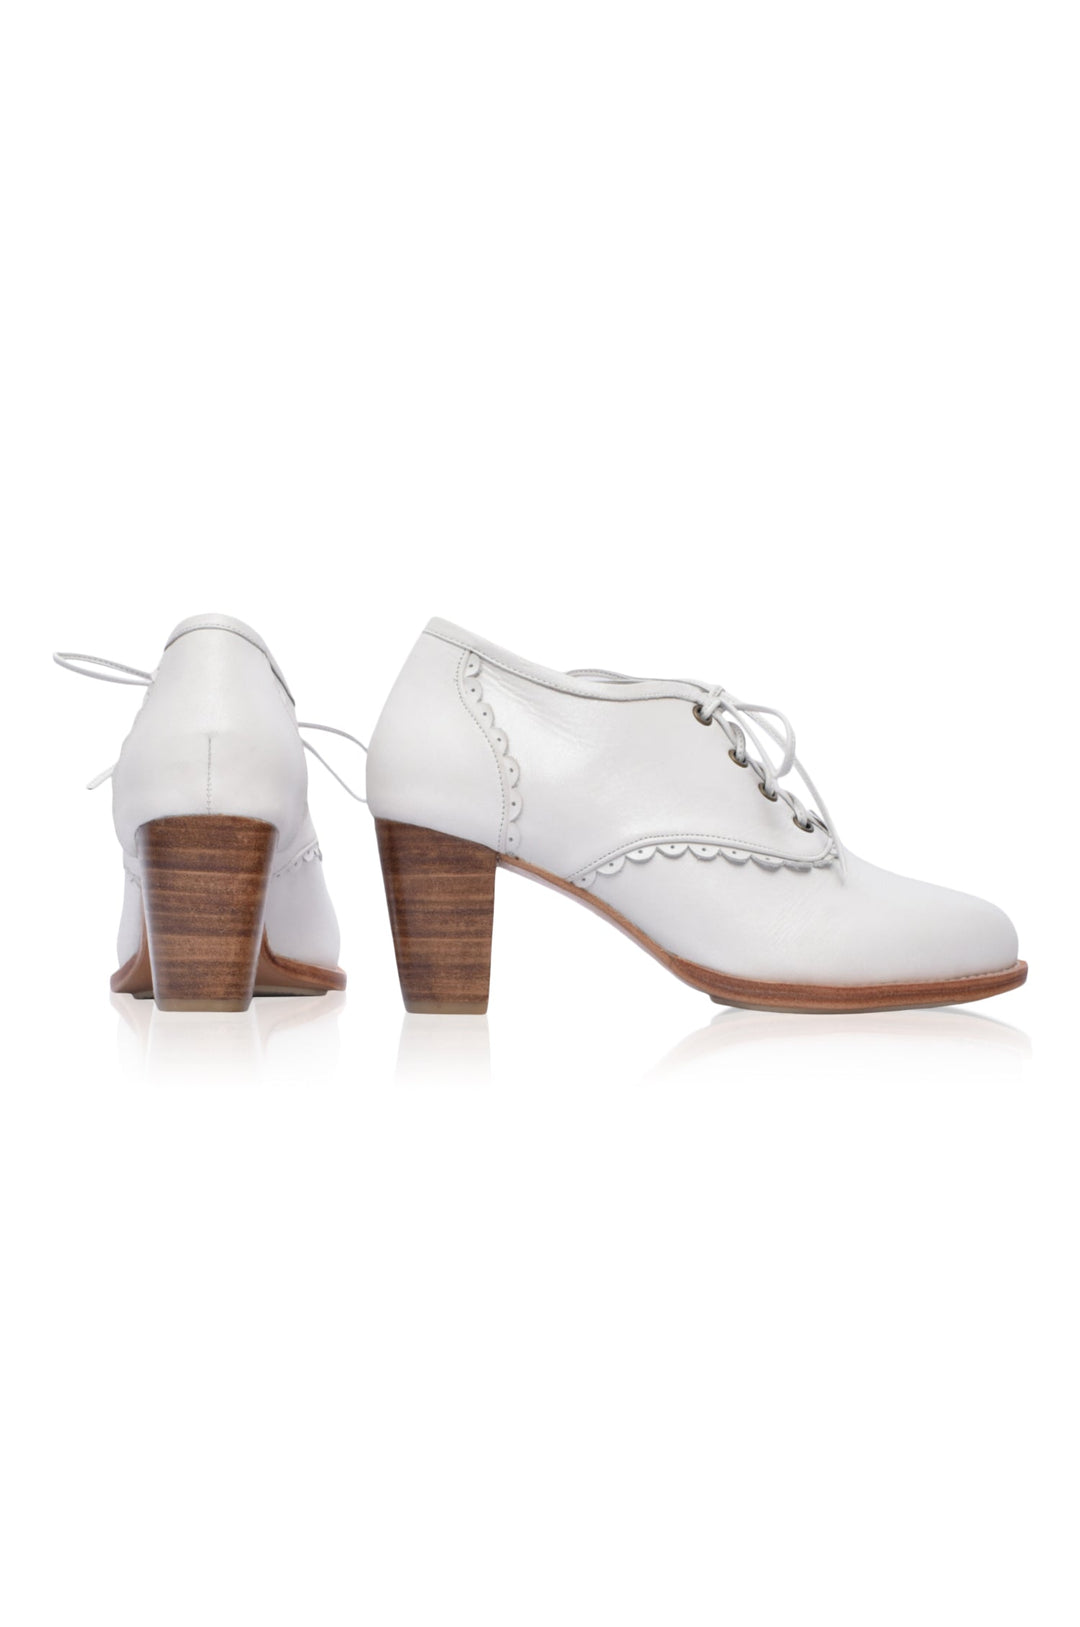 Lace Oxford Heels by ELF